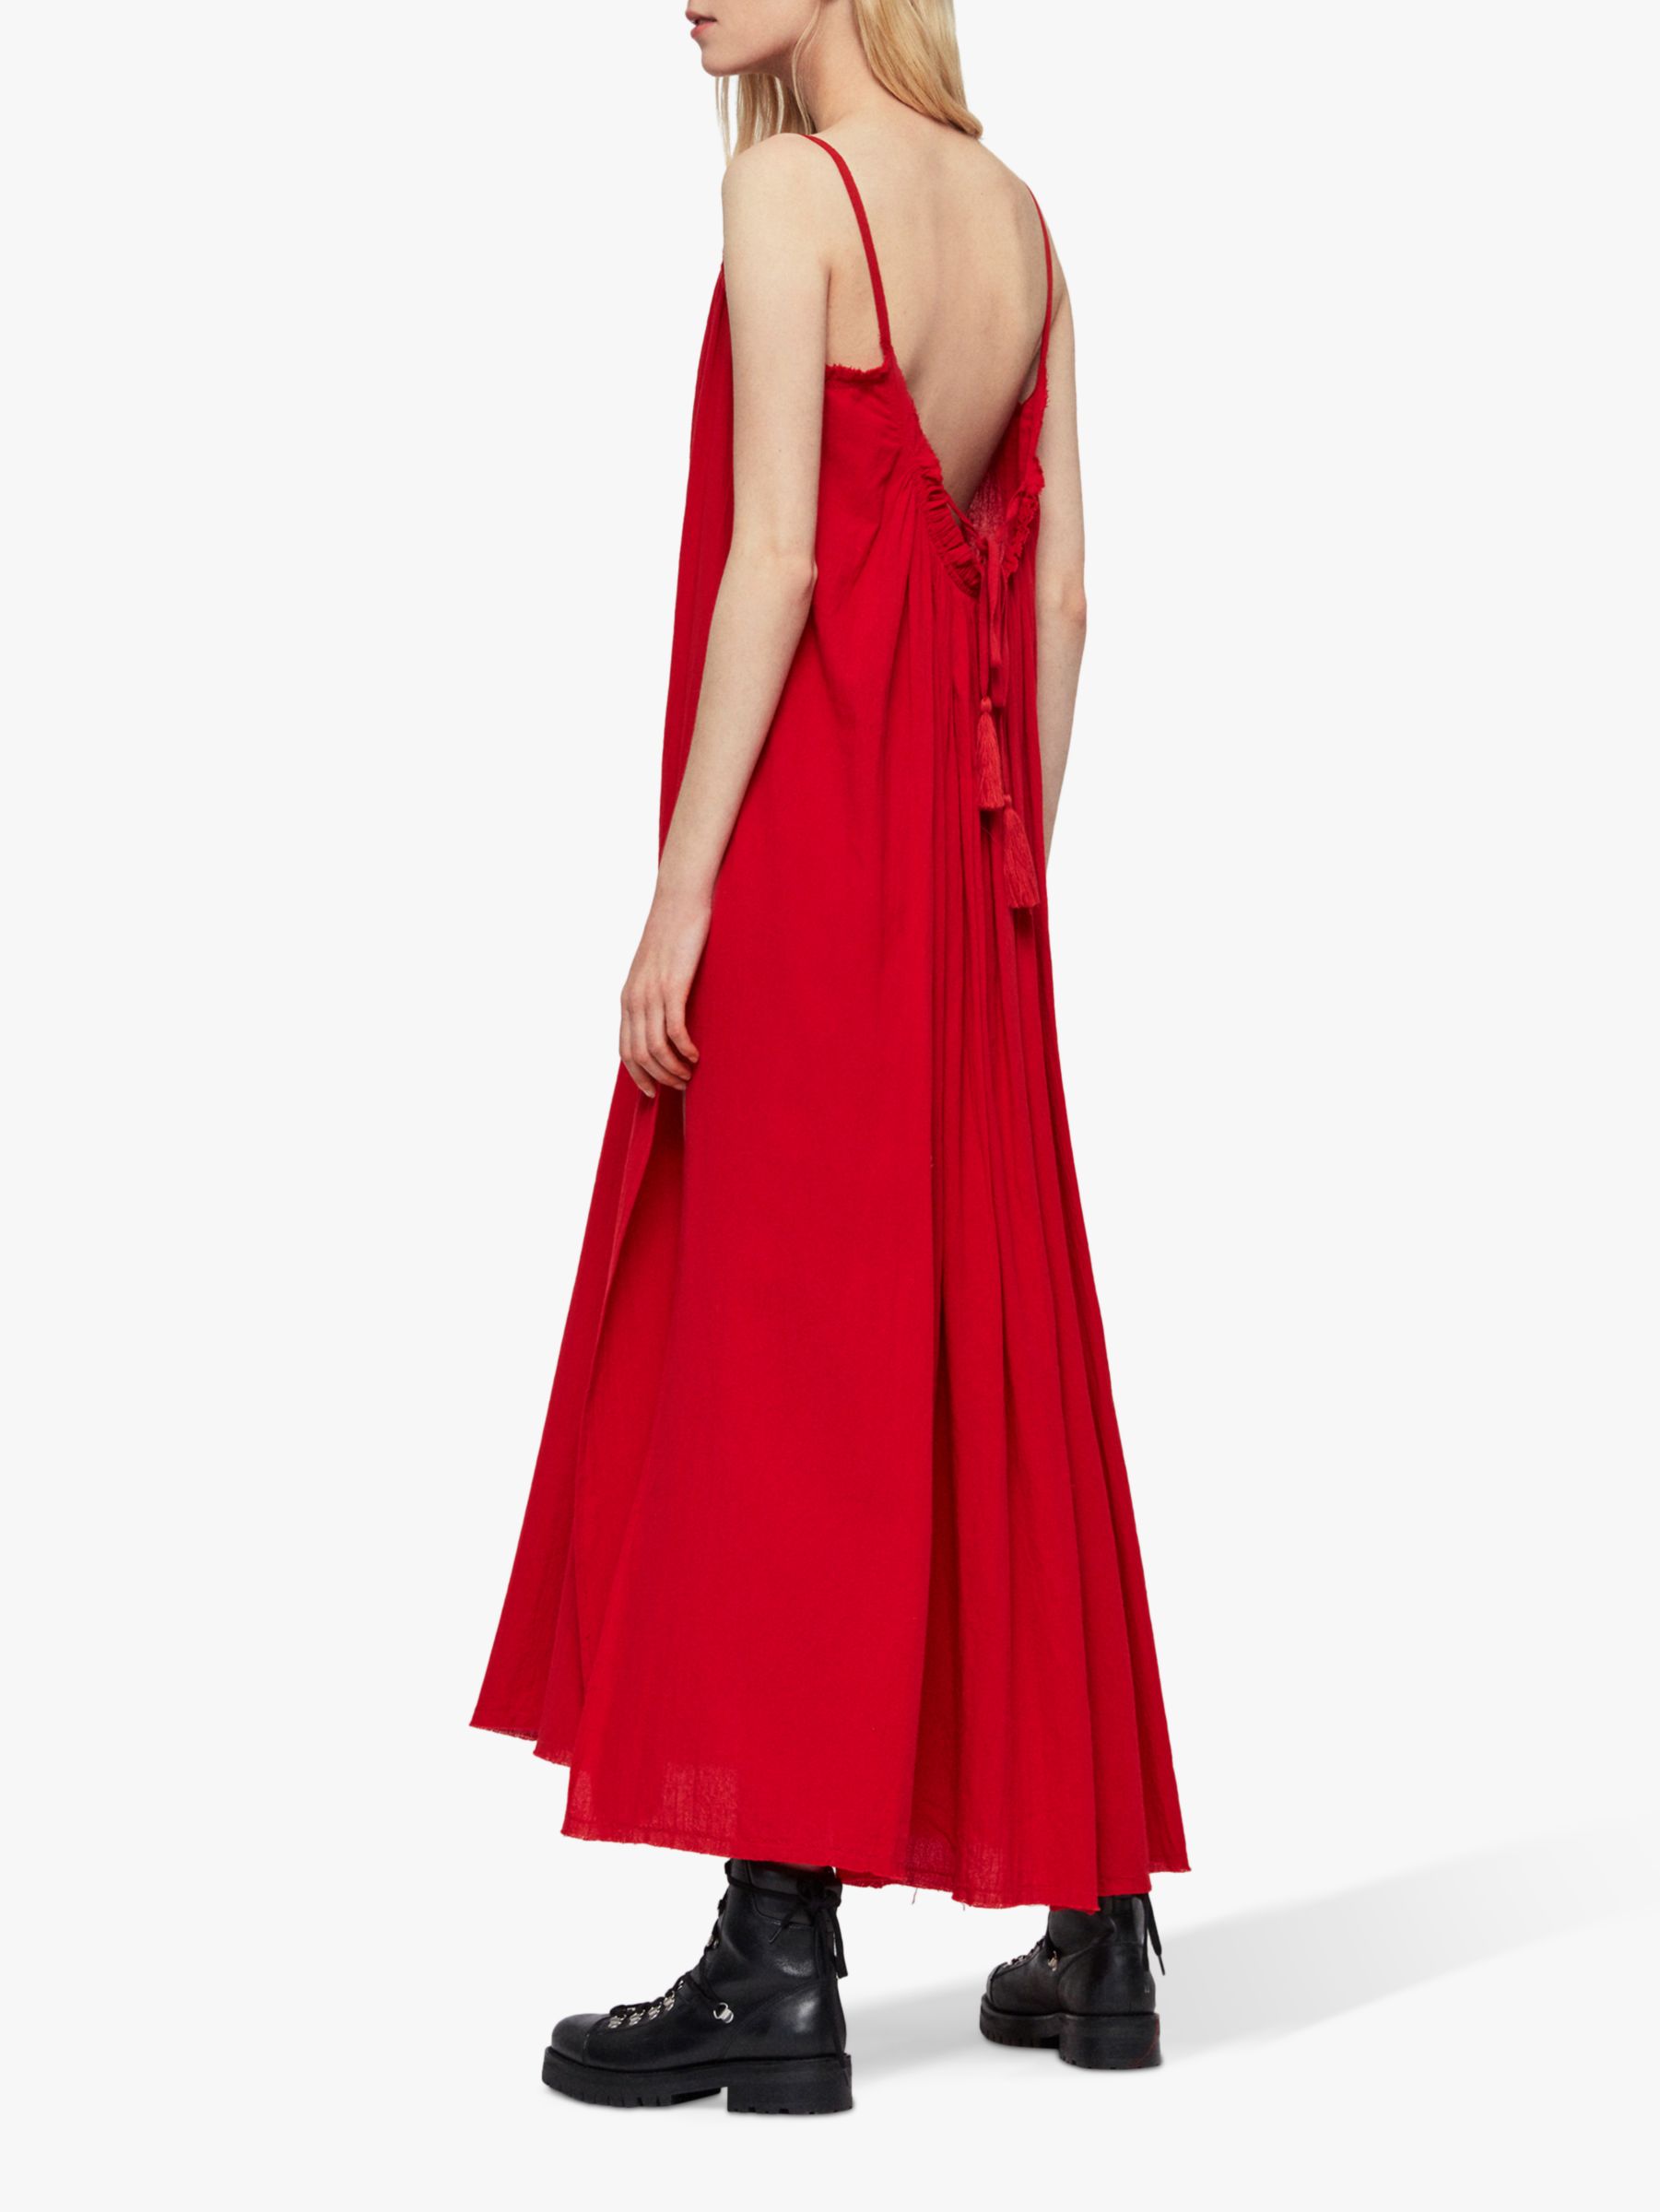 all saints red check dress